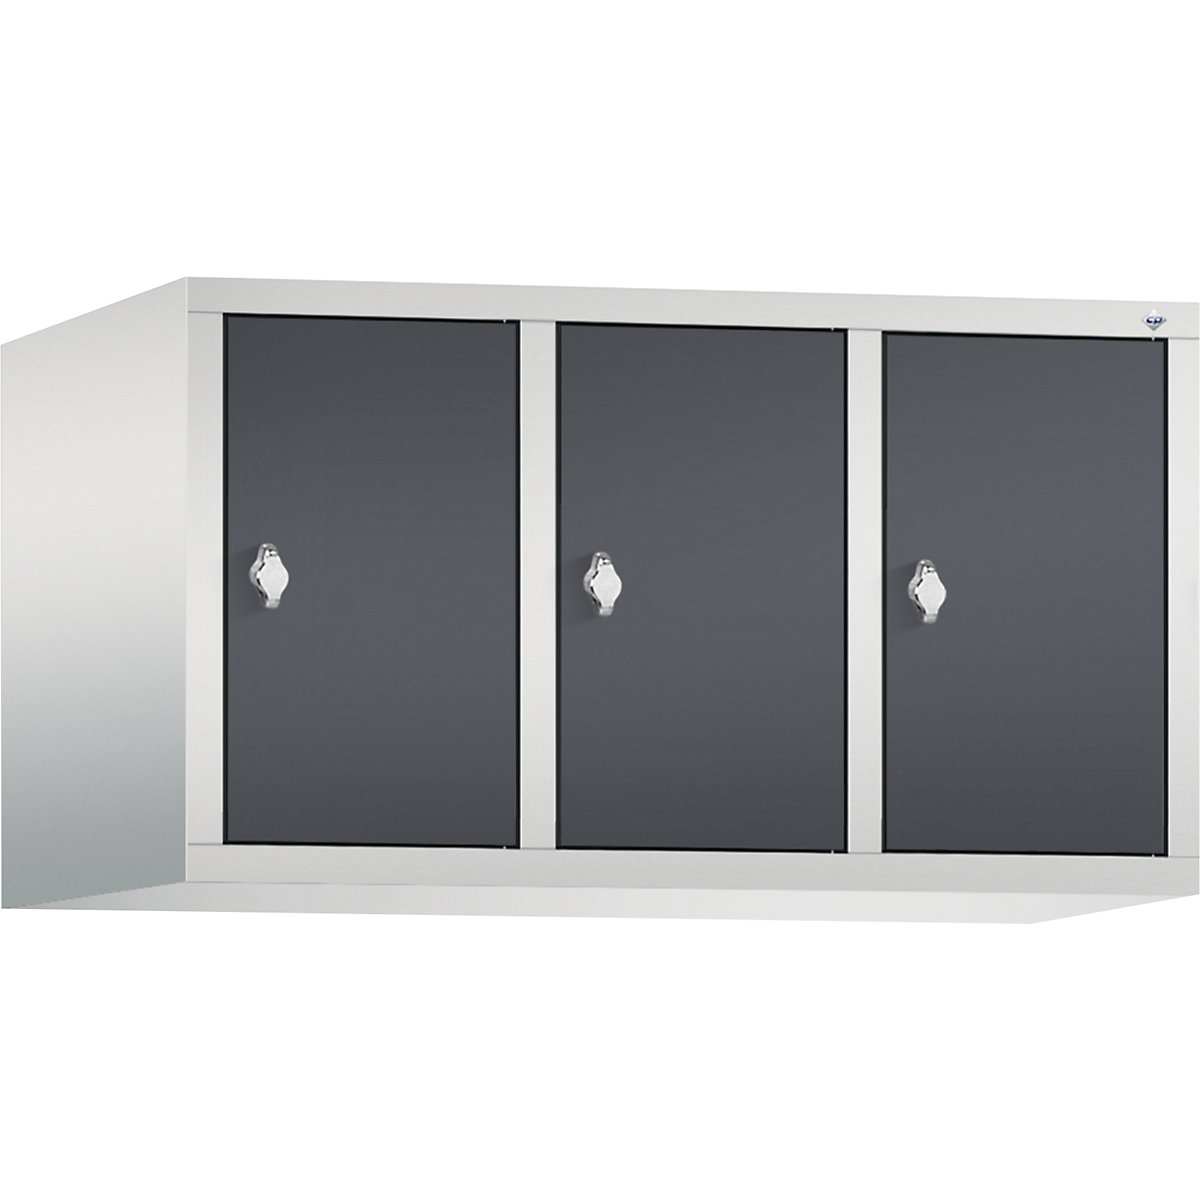 CLASSIC add-on cupboard – C+P, 3 compartments, compartment width 300 mm, light grey / black grey-7